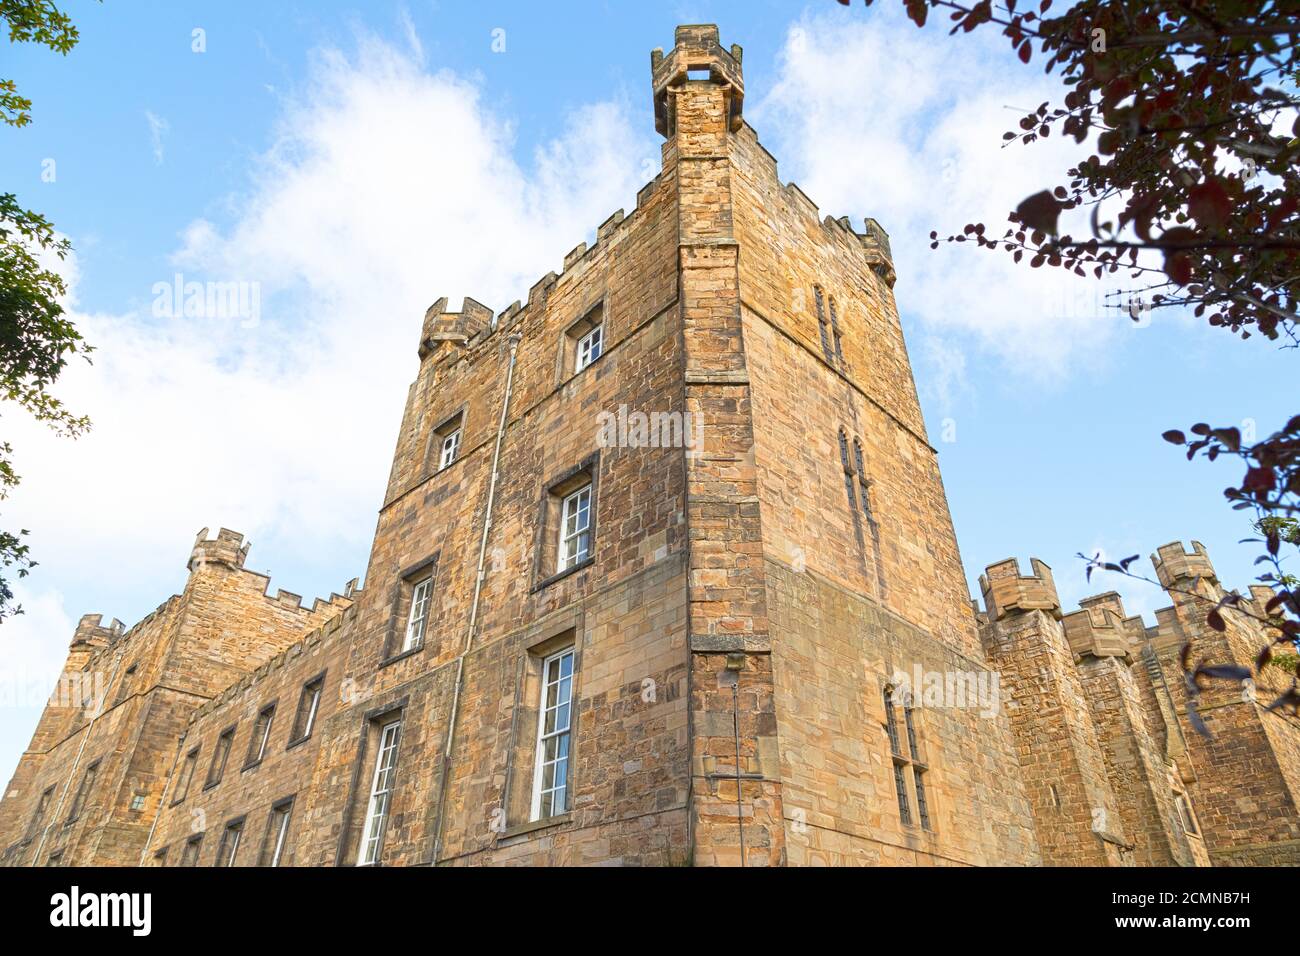 Lumley Castle in County Durham, England. The 14th century fortification is a Grade I listed building and a four-star hotel. Stock Photo